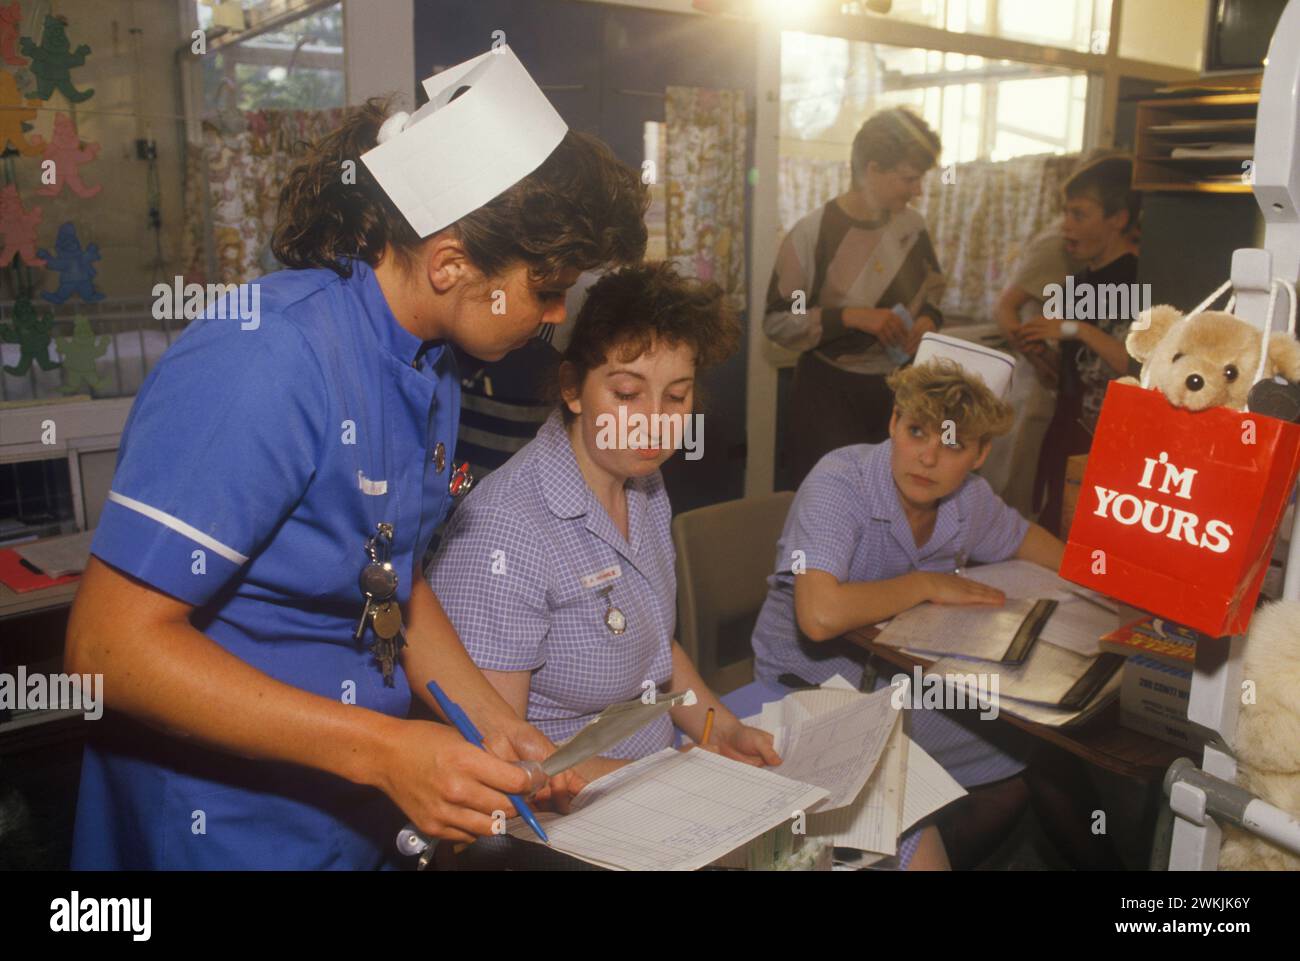 Staff Nurse Catherine Ellis at the Alder Hey Children's Hospital, with two nurses, comparing and checking patients hospital records. Liverpool, England 1988 1980s UK HOMER SYKES Stock Photo